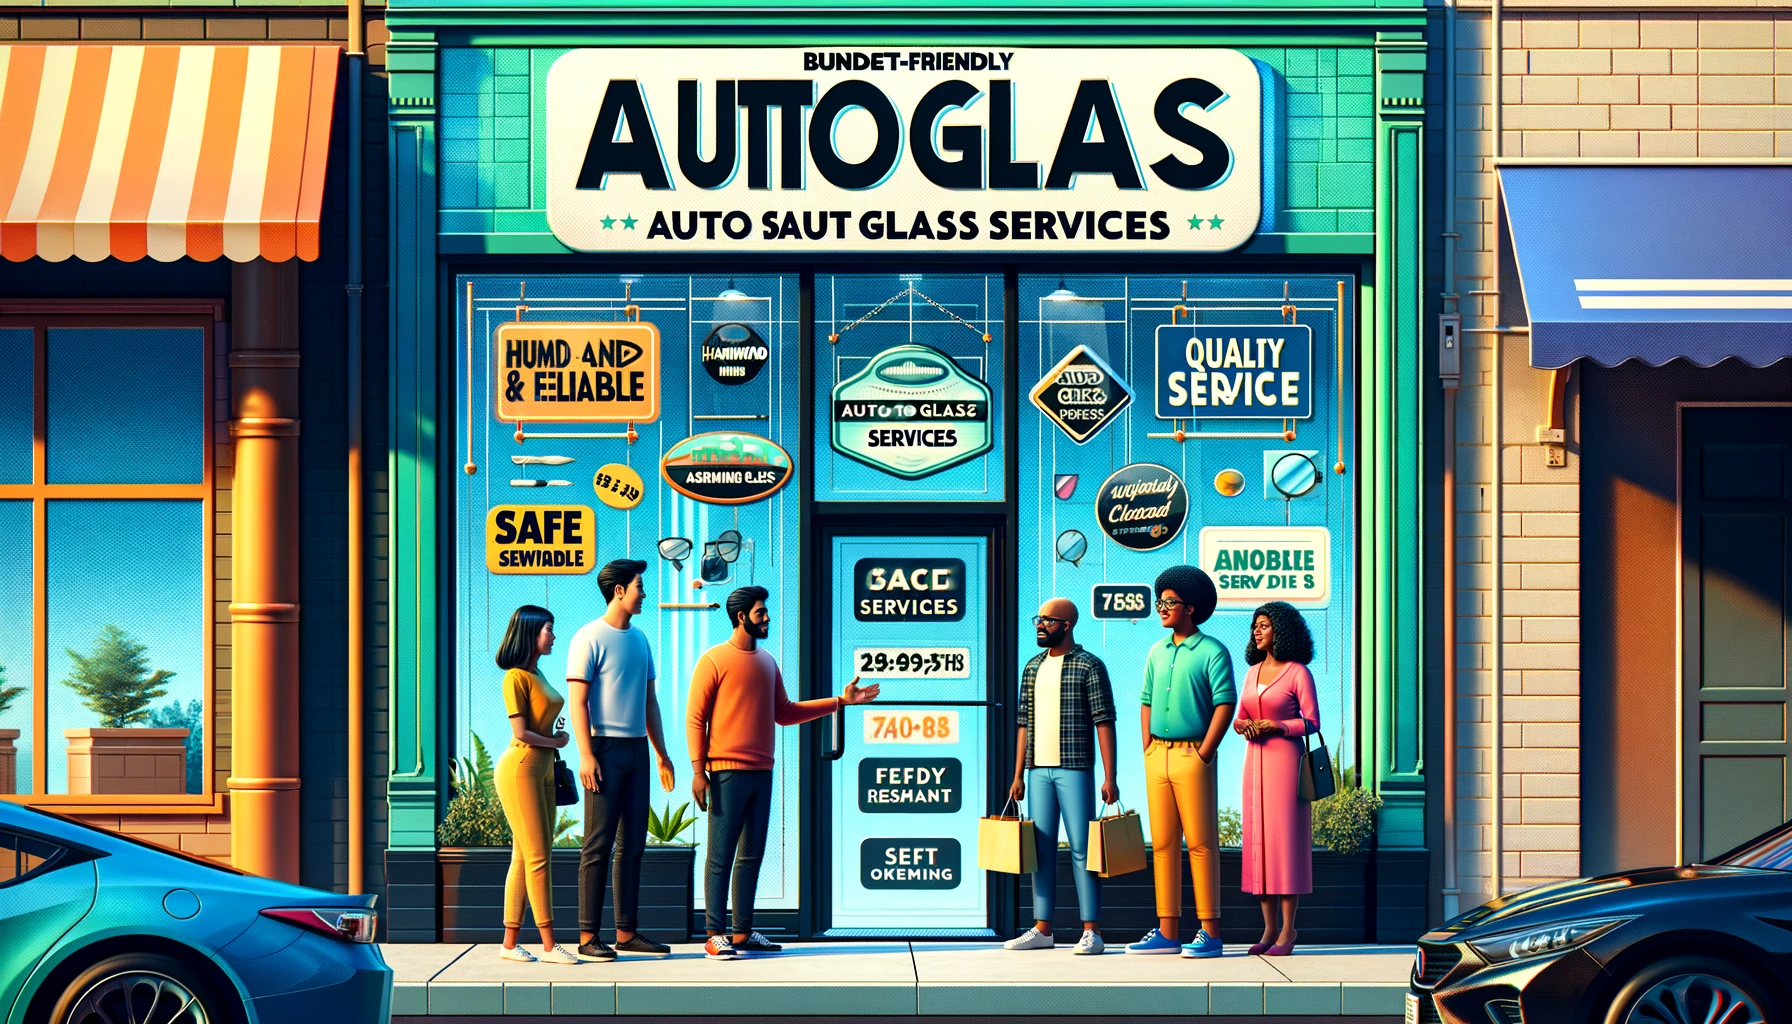 Hammond’s Budget-Friendly Auto Glass Services: Safe and Reliable